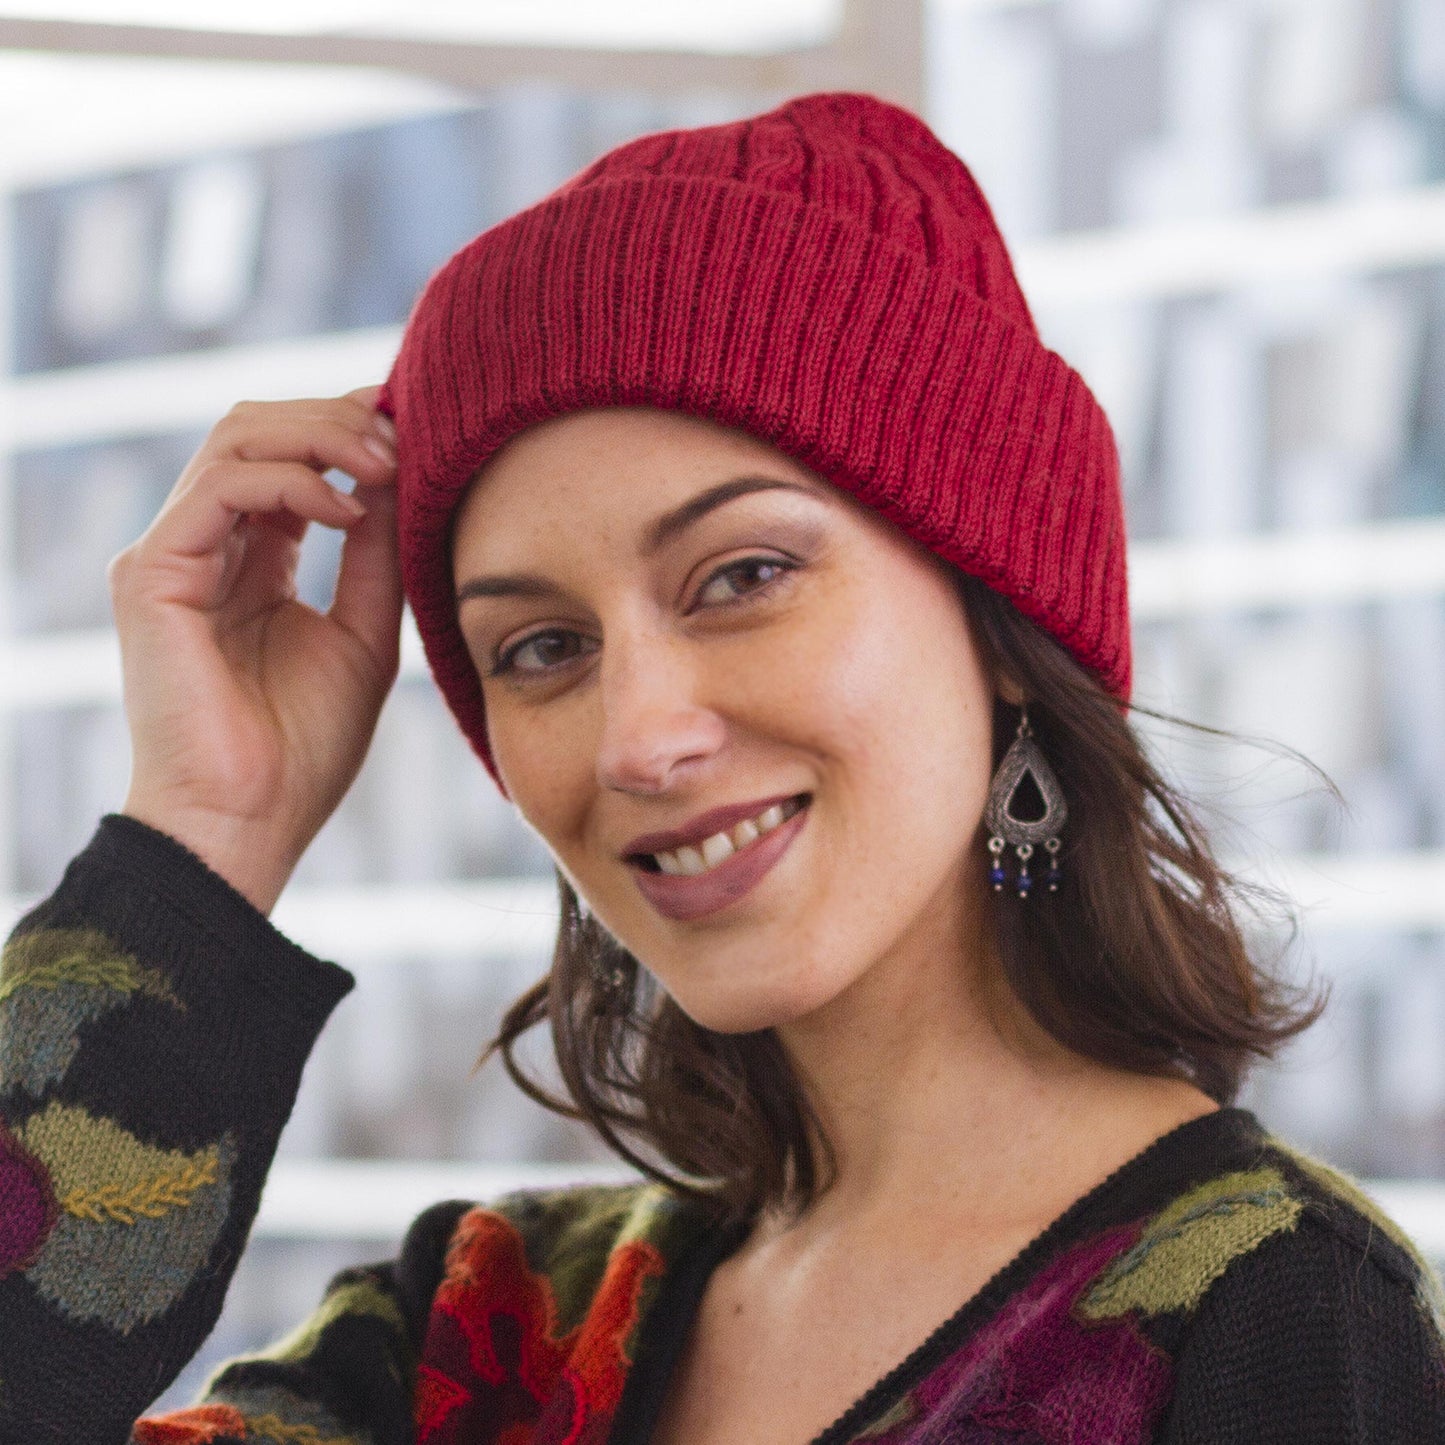 Comfy in Red Crimson Red 100% Alpaca Soft Cable Knit Hat from Peru